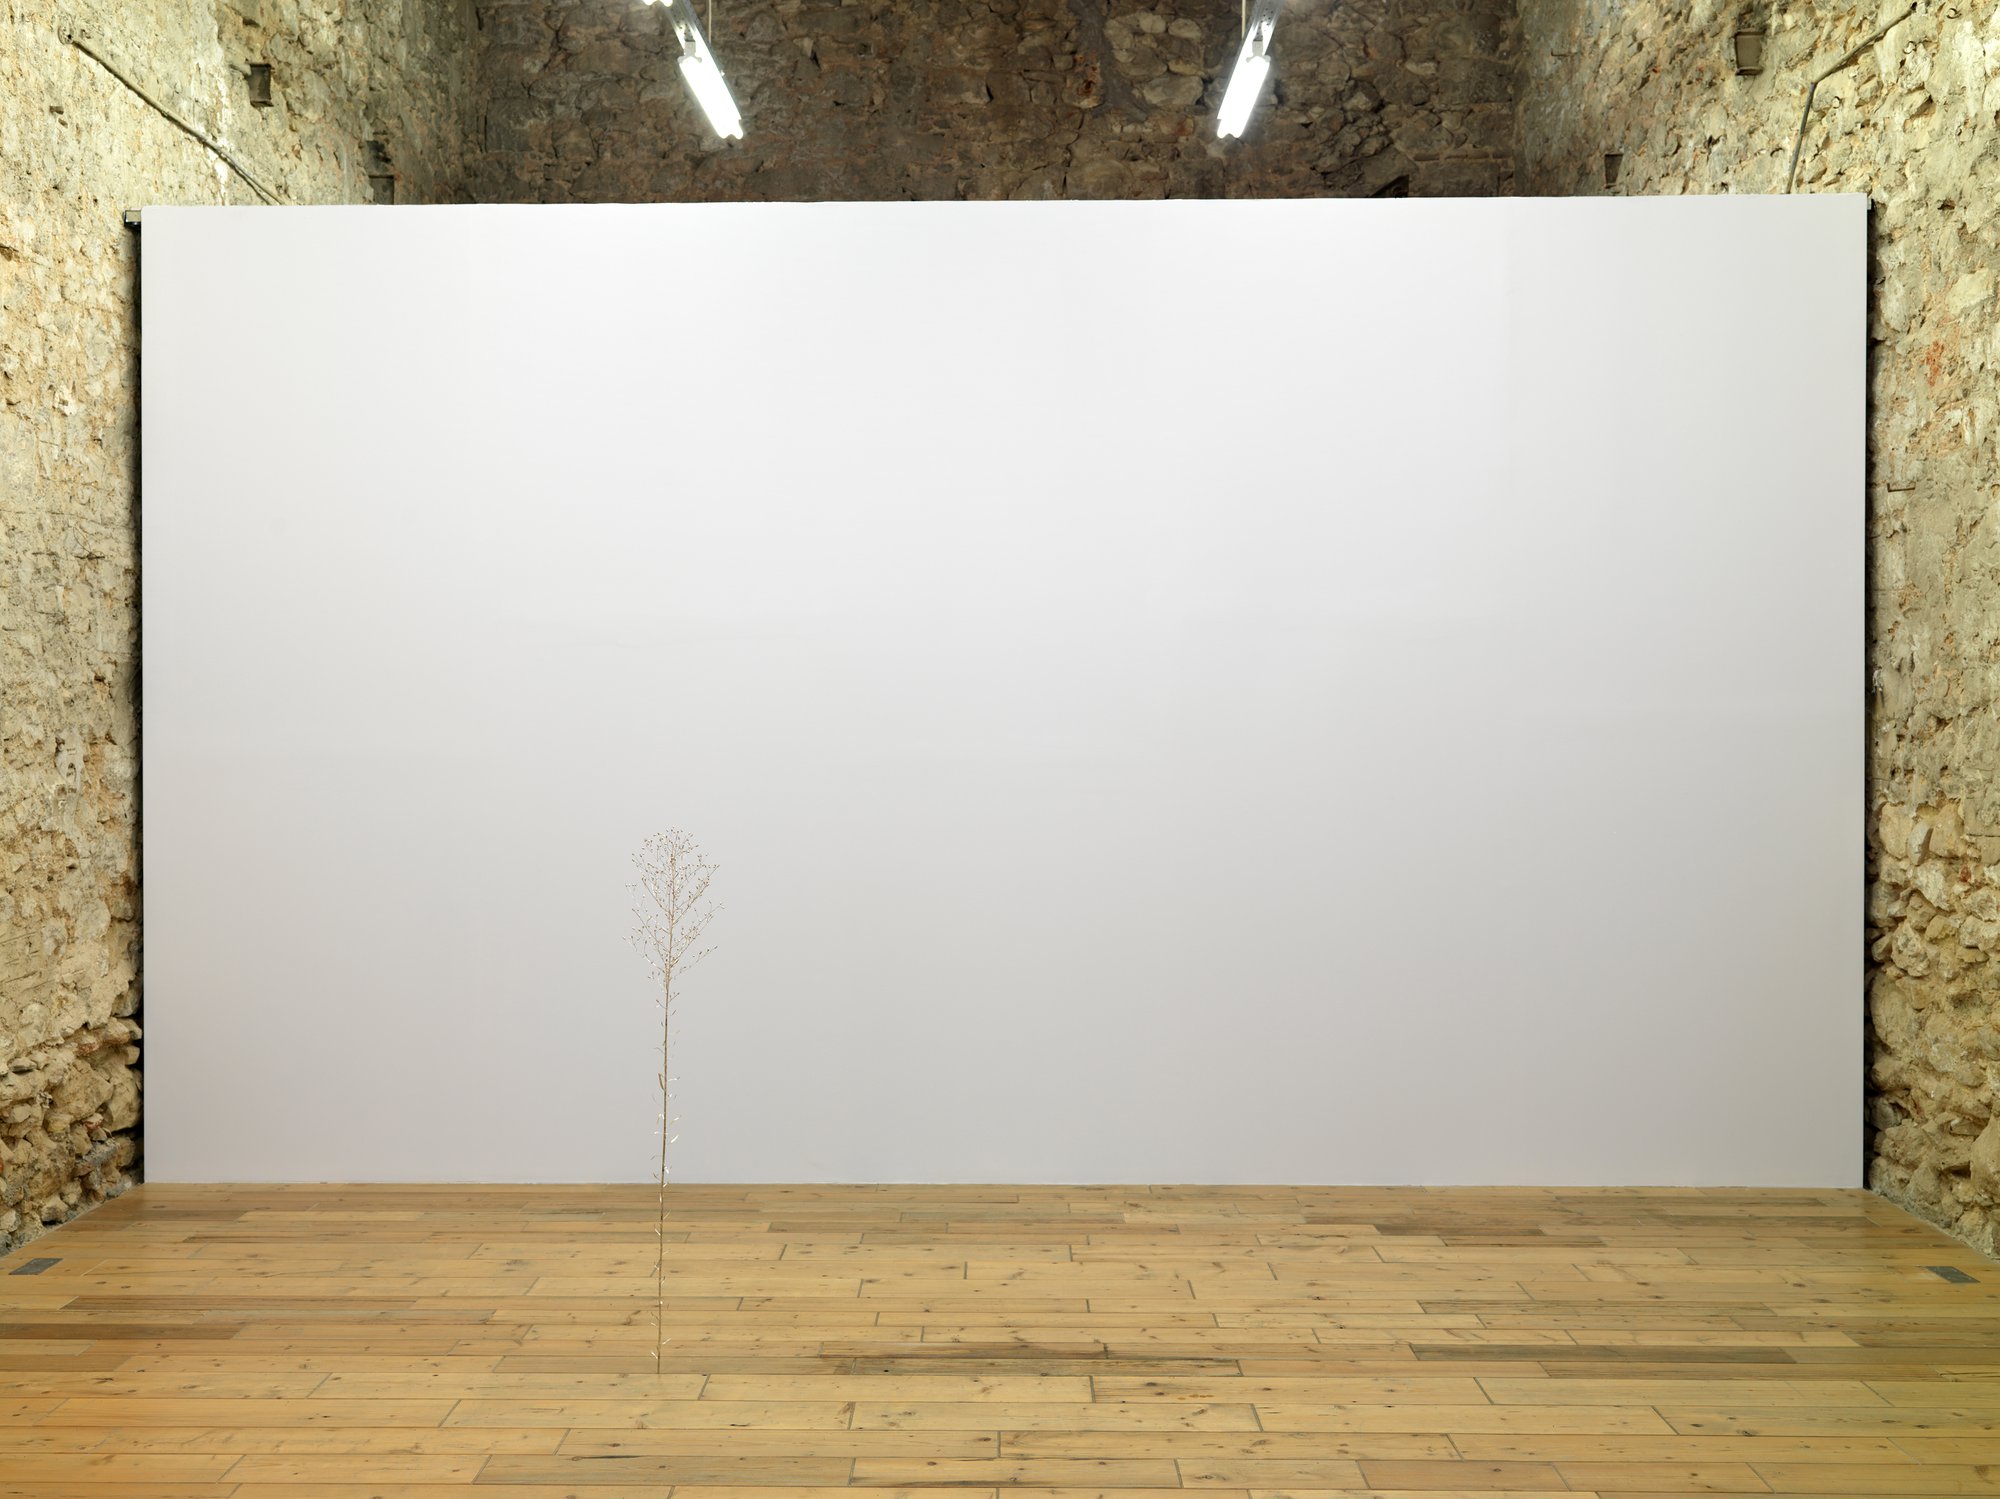 Christodoulos Panayiotou, Horseweed, sterling silver sculpture approx. 130 x 25 x 25 cm (51 1/8 x 9 7/8 x 9 7/8 in), 2021. Installation view, January, February, May, June, July, August, September, October, December, Rodeo, Piraeus, 2021